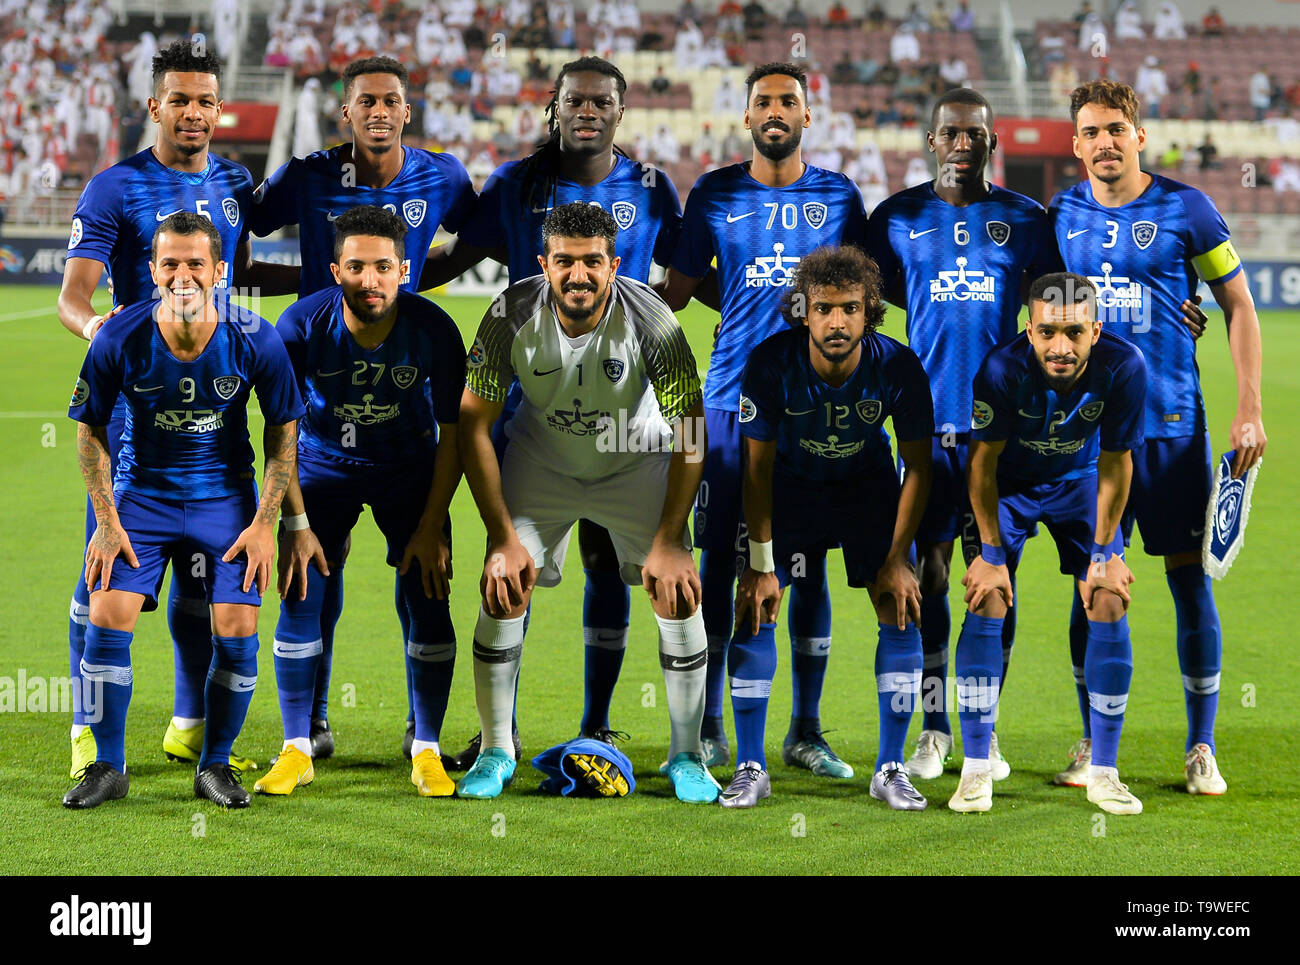 Doha, Capital of Qatar. 20th May, 2019. Al Hilal players pose for a team  photo prior to the AFC Champions League group C soccer match between  Qatar's Al Duhail and Saudi Arabia's